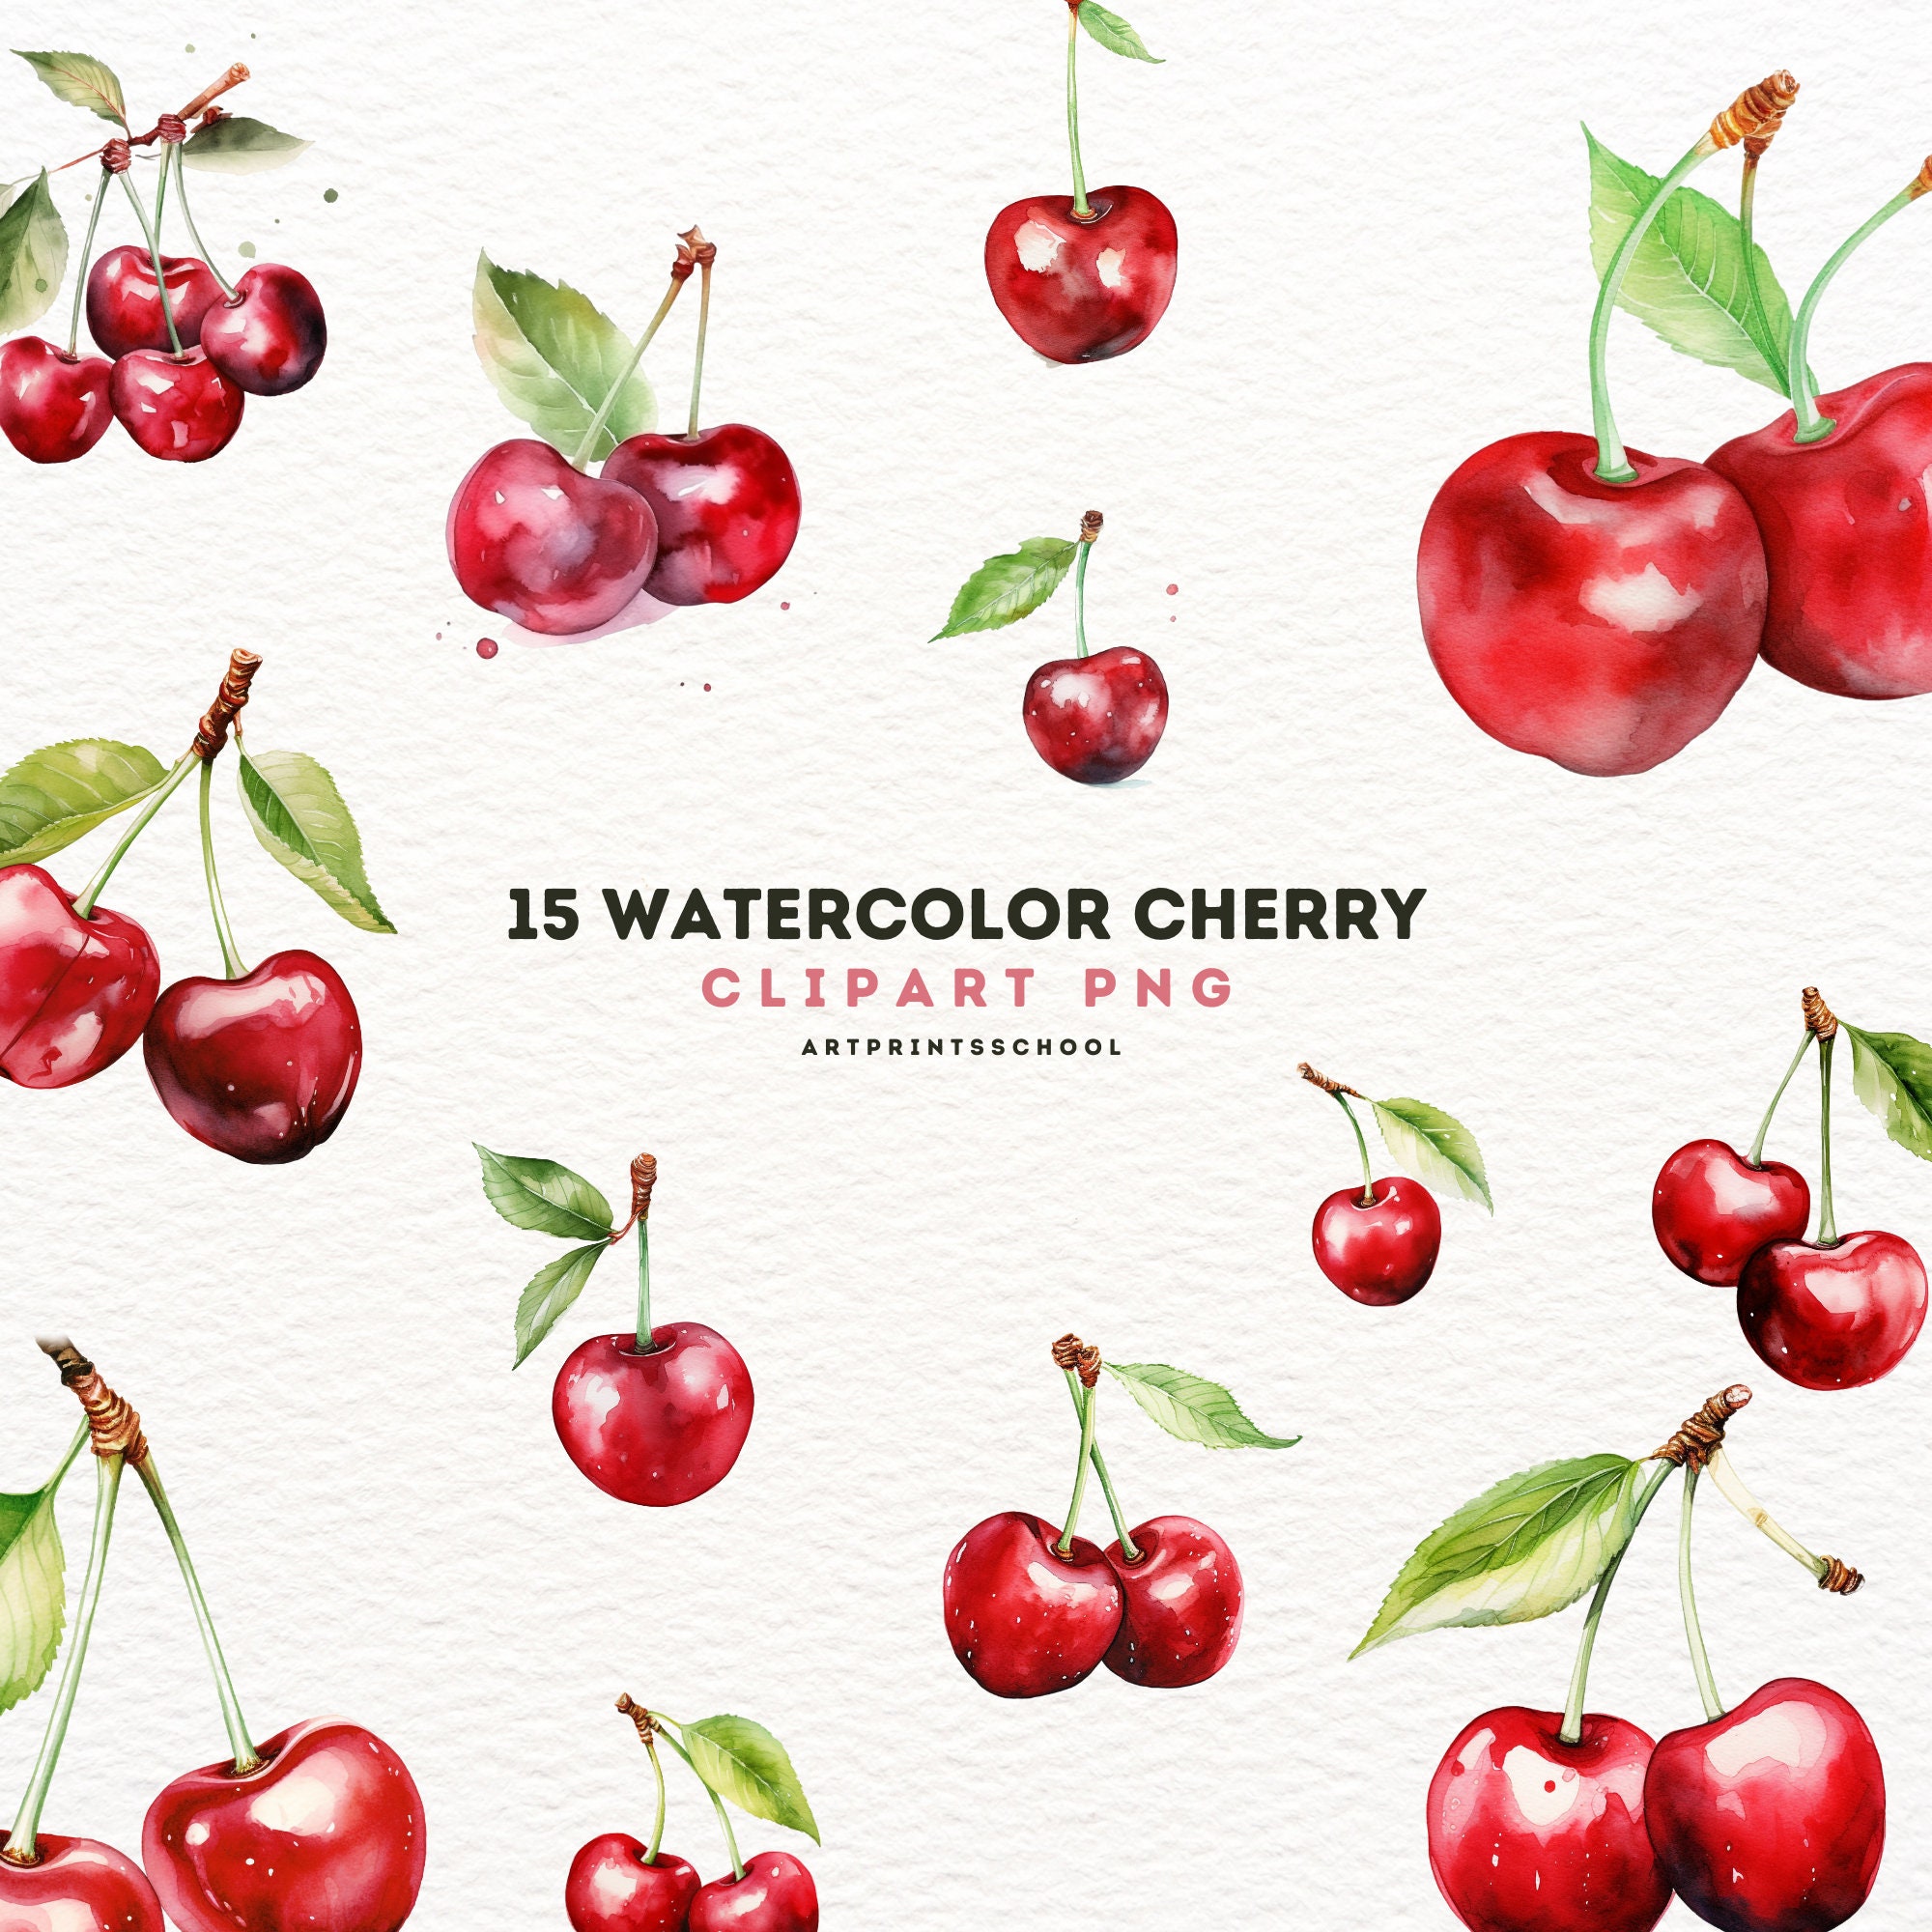 Watercolor Cherry Clipart 15 High Quality PNG Commercial picture image